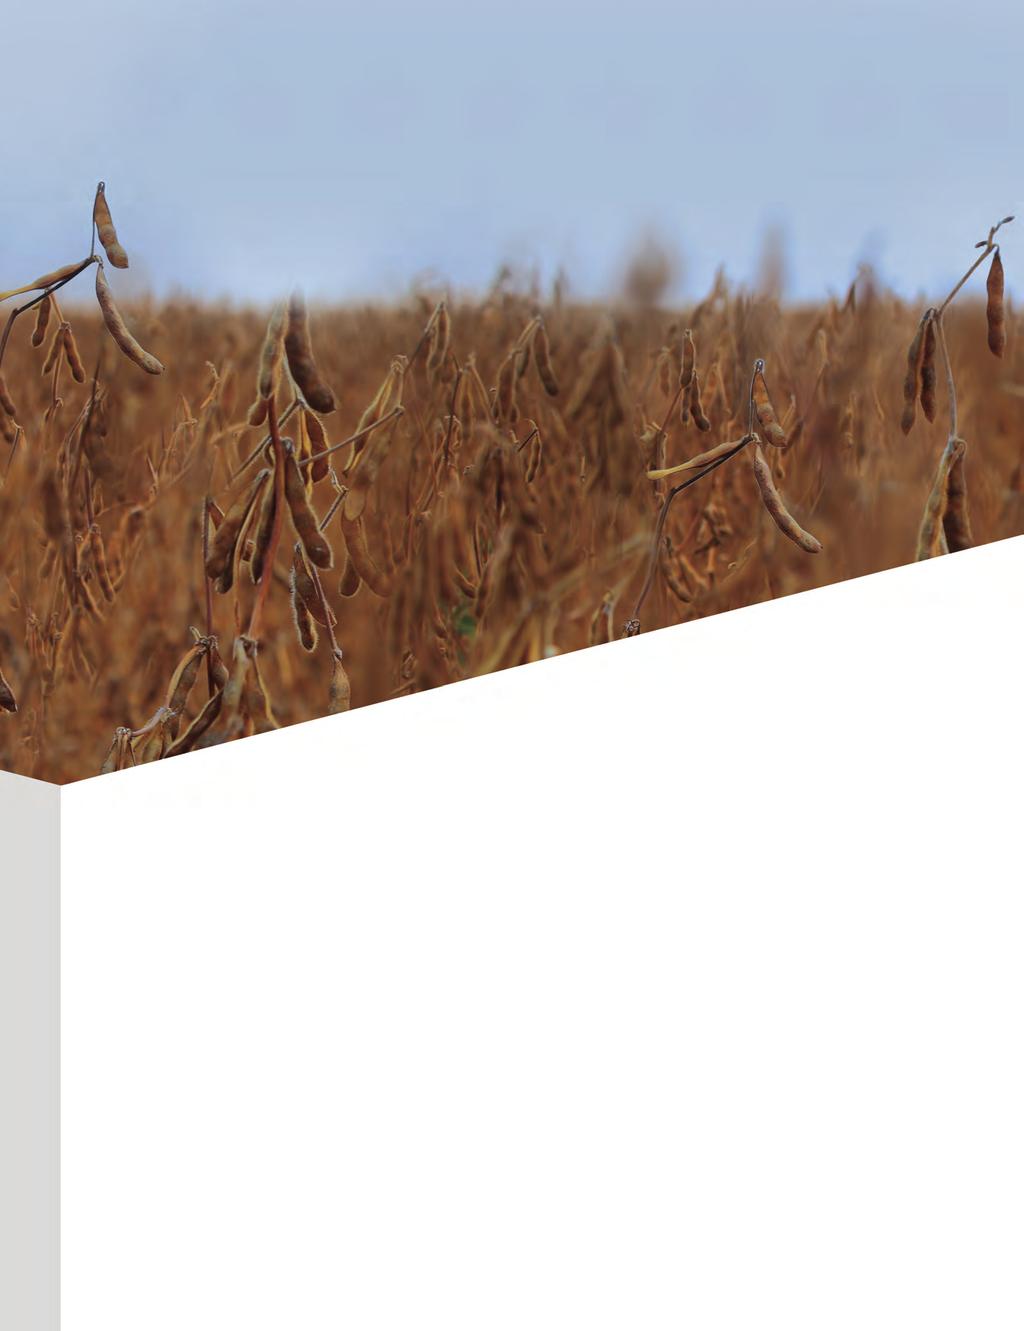 Introducing two NEW ULTRA-EARLY DEKALB Roundup Ready 2 XTEND Soybean Varieties The newest and earliest DEKALB Roundup Ready 2 Xtend soybeans to come from the DEKALB Breeding Program.